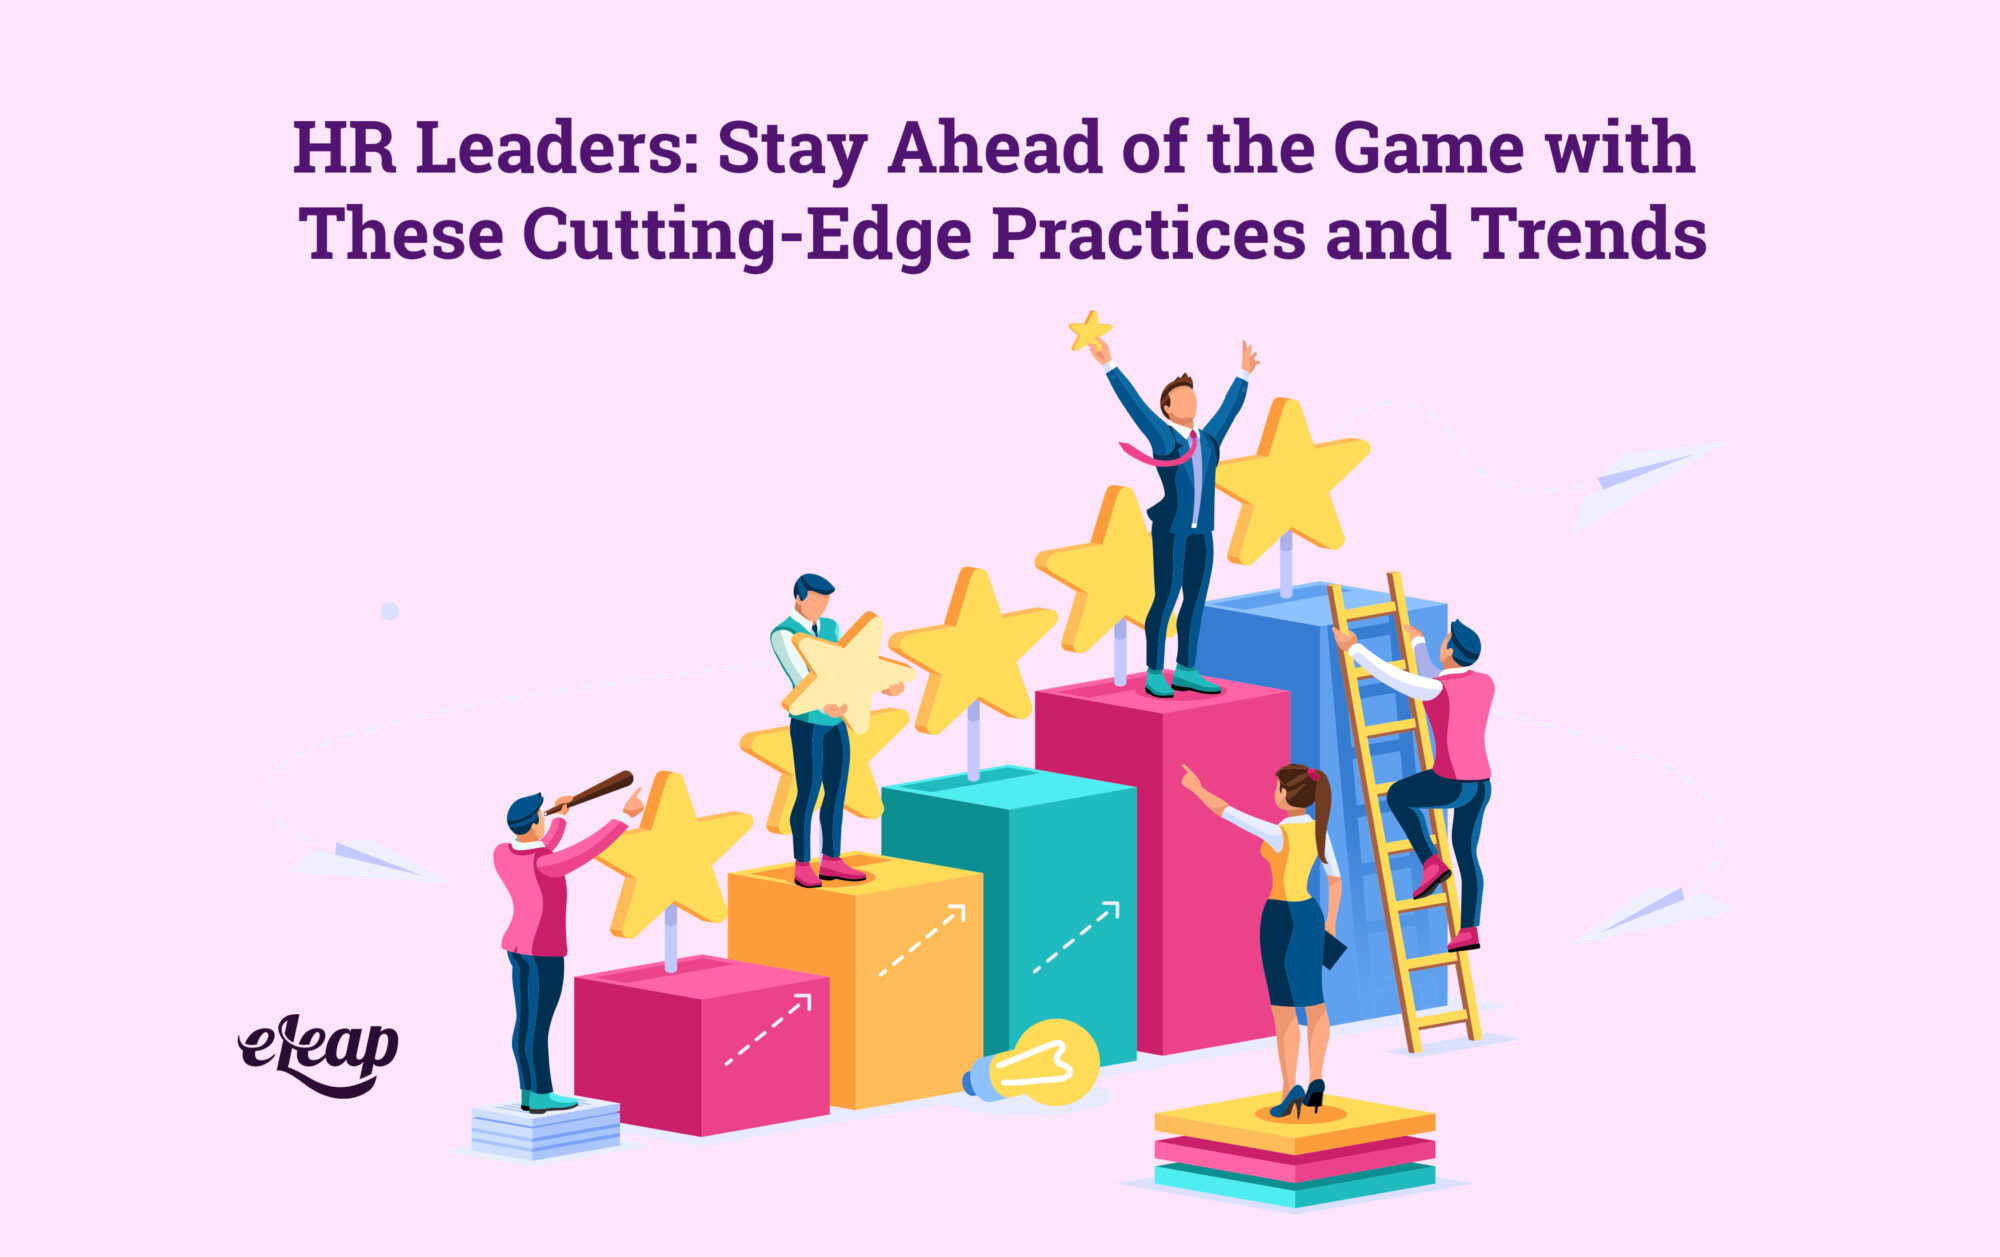 HR Leaders: Stay Ahead of the Game with These Cutting-Edge Practices and Trends